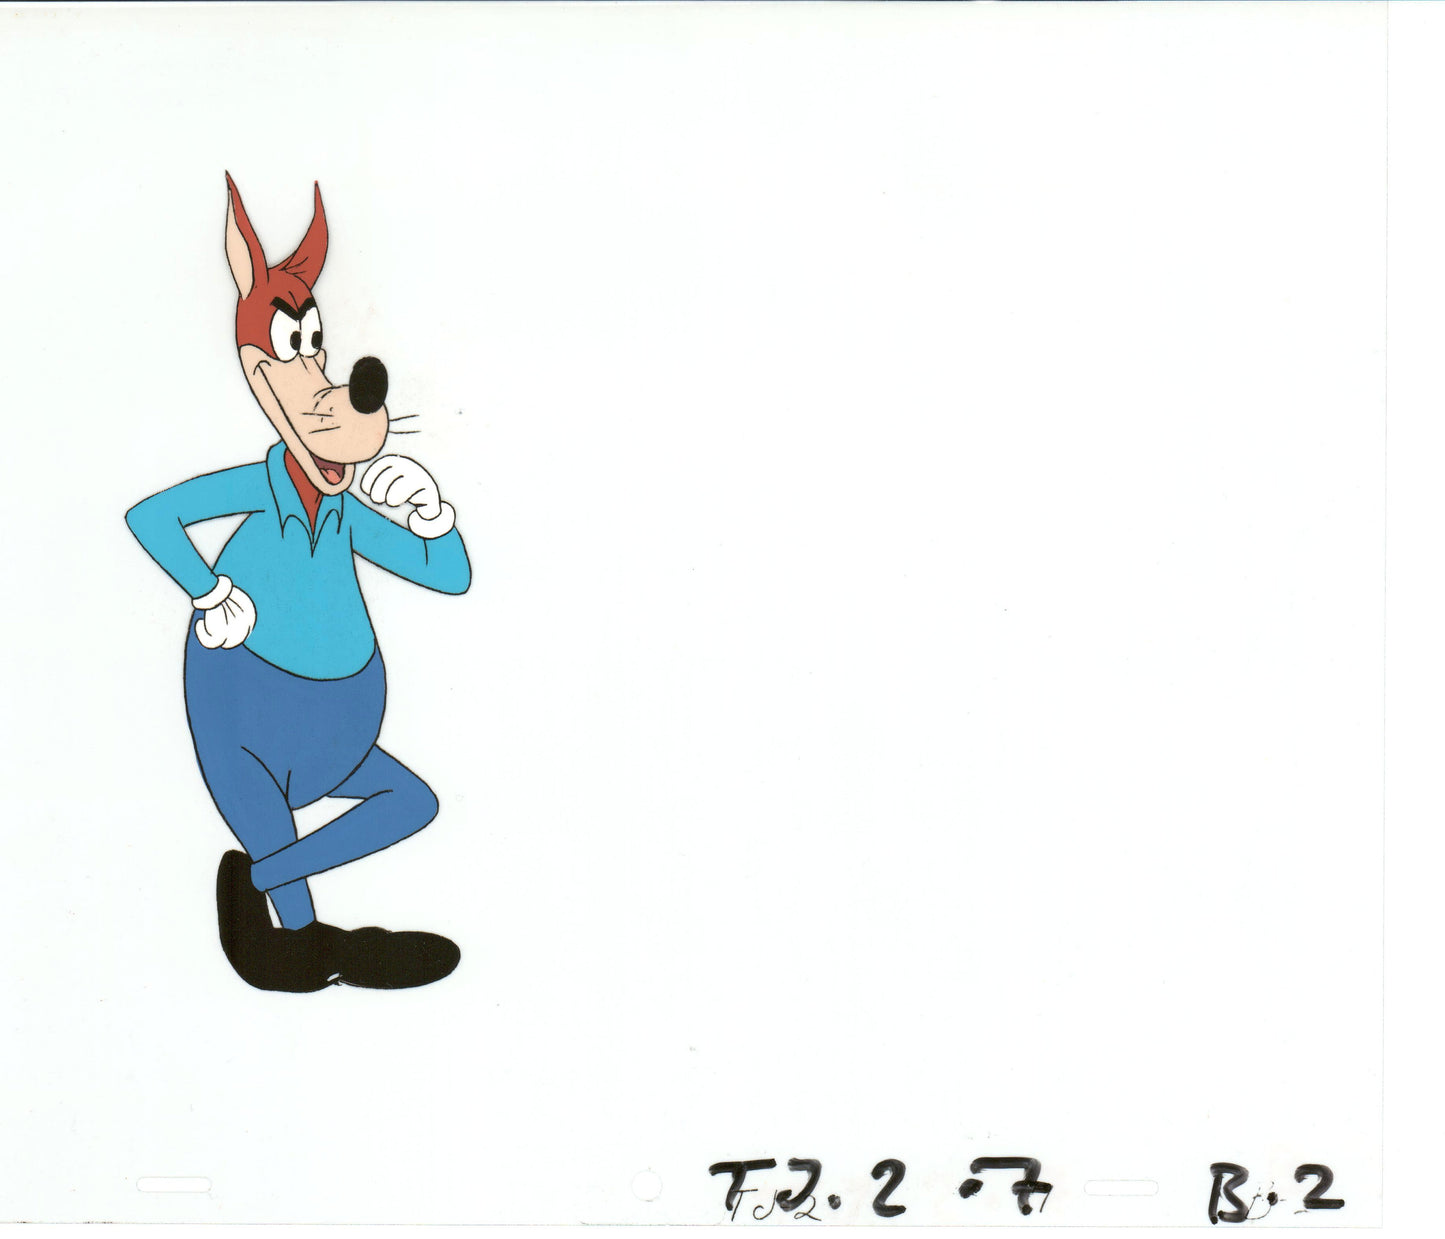 Tom & Jerry Original Production Animation Cel from Filmation 1980-82 b4368